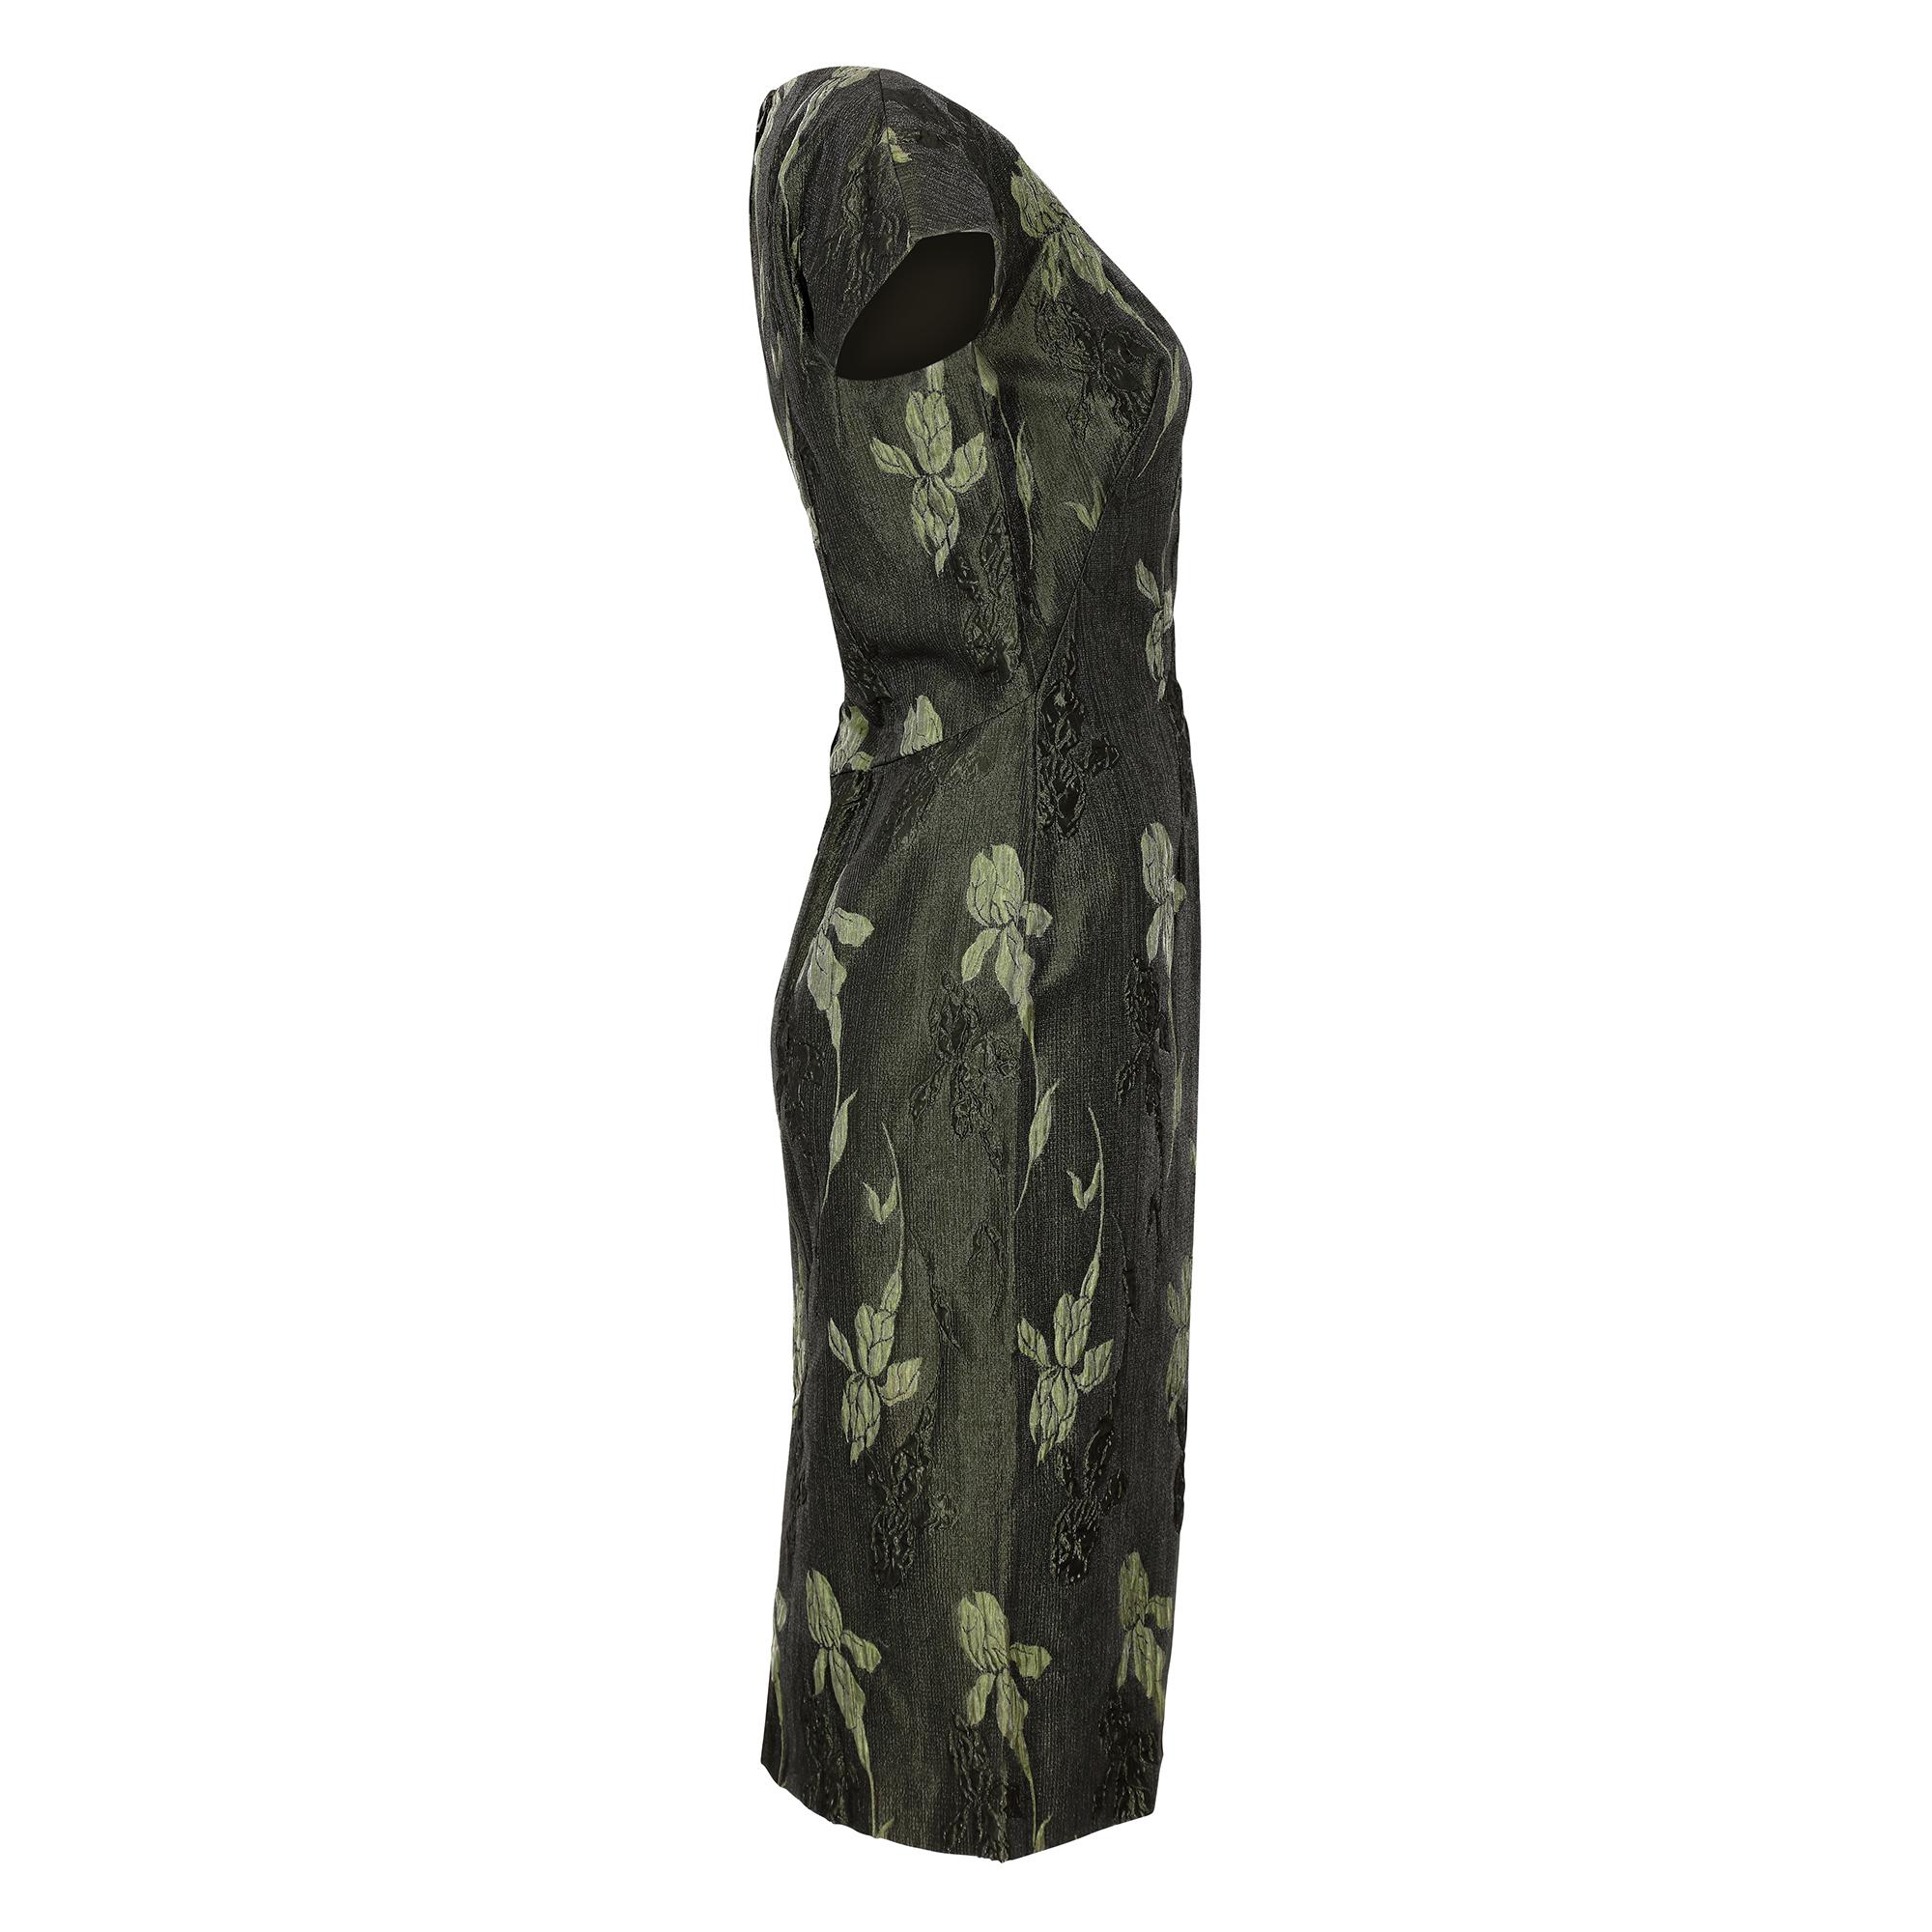 This elegant vintage 1960s metallic evening dress is of high-end, British manufactured quality although unlabelled. The opulent and textured brocade fabric has an iris design in alternating two-tone forest green which shimmers in the light with